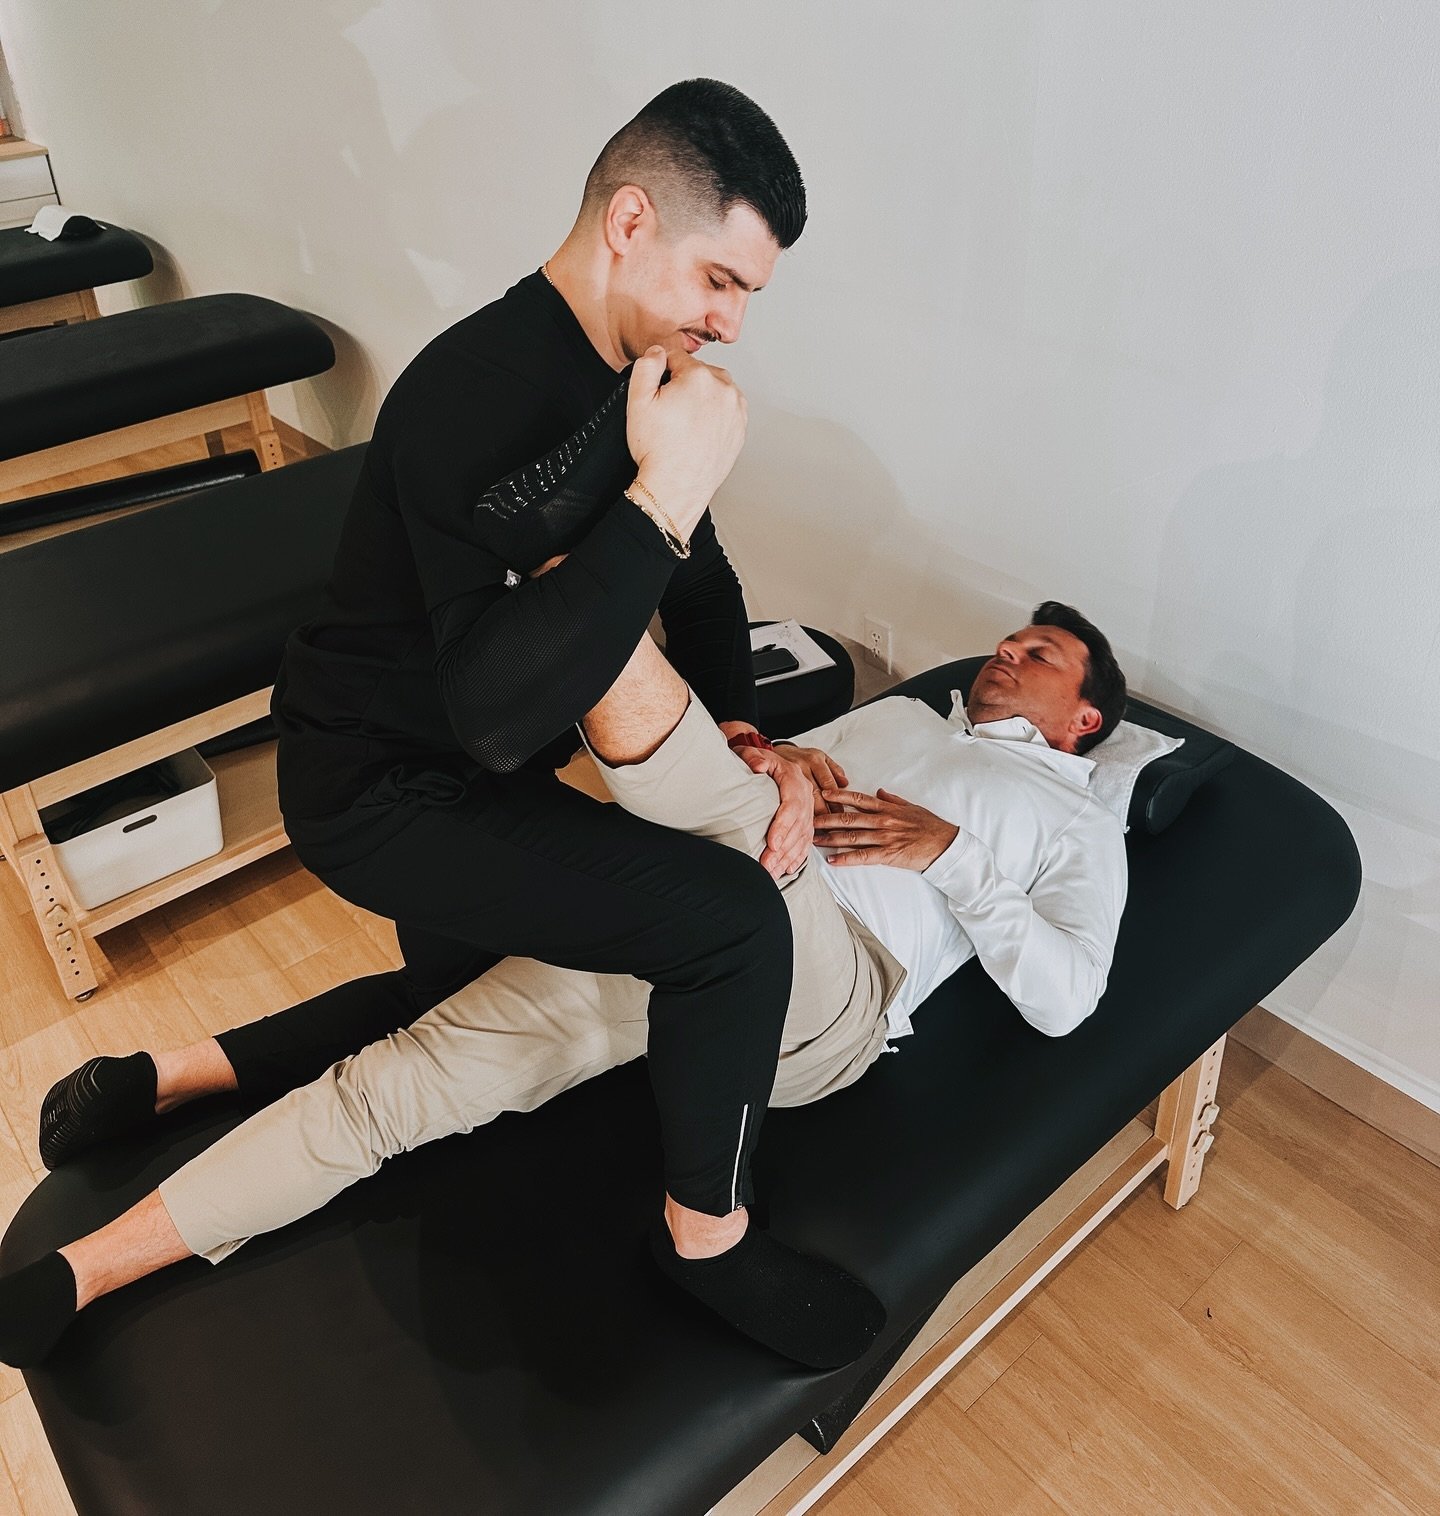 Meet Tony ✅ 

A graduate of the University of Sports in Albania, he specialized in the sport of gymnastics and graduated as a physical education teacher. He also graduated with a Bachelor of Physiotherapy.

His Specialty? He Performs therapeutic pro